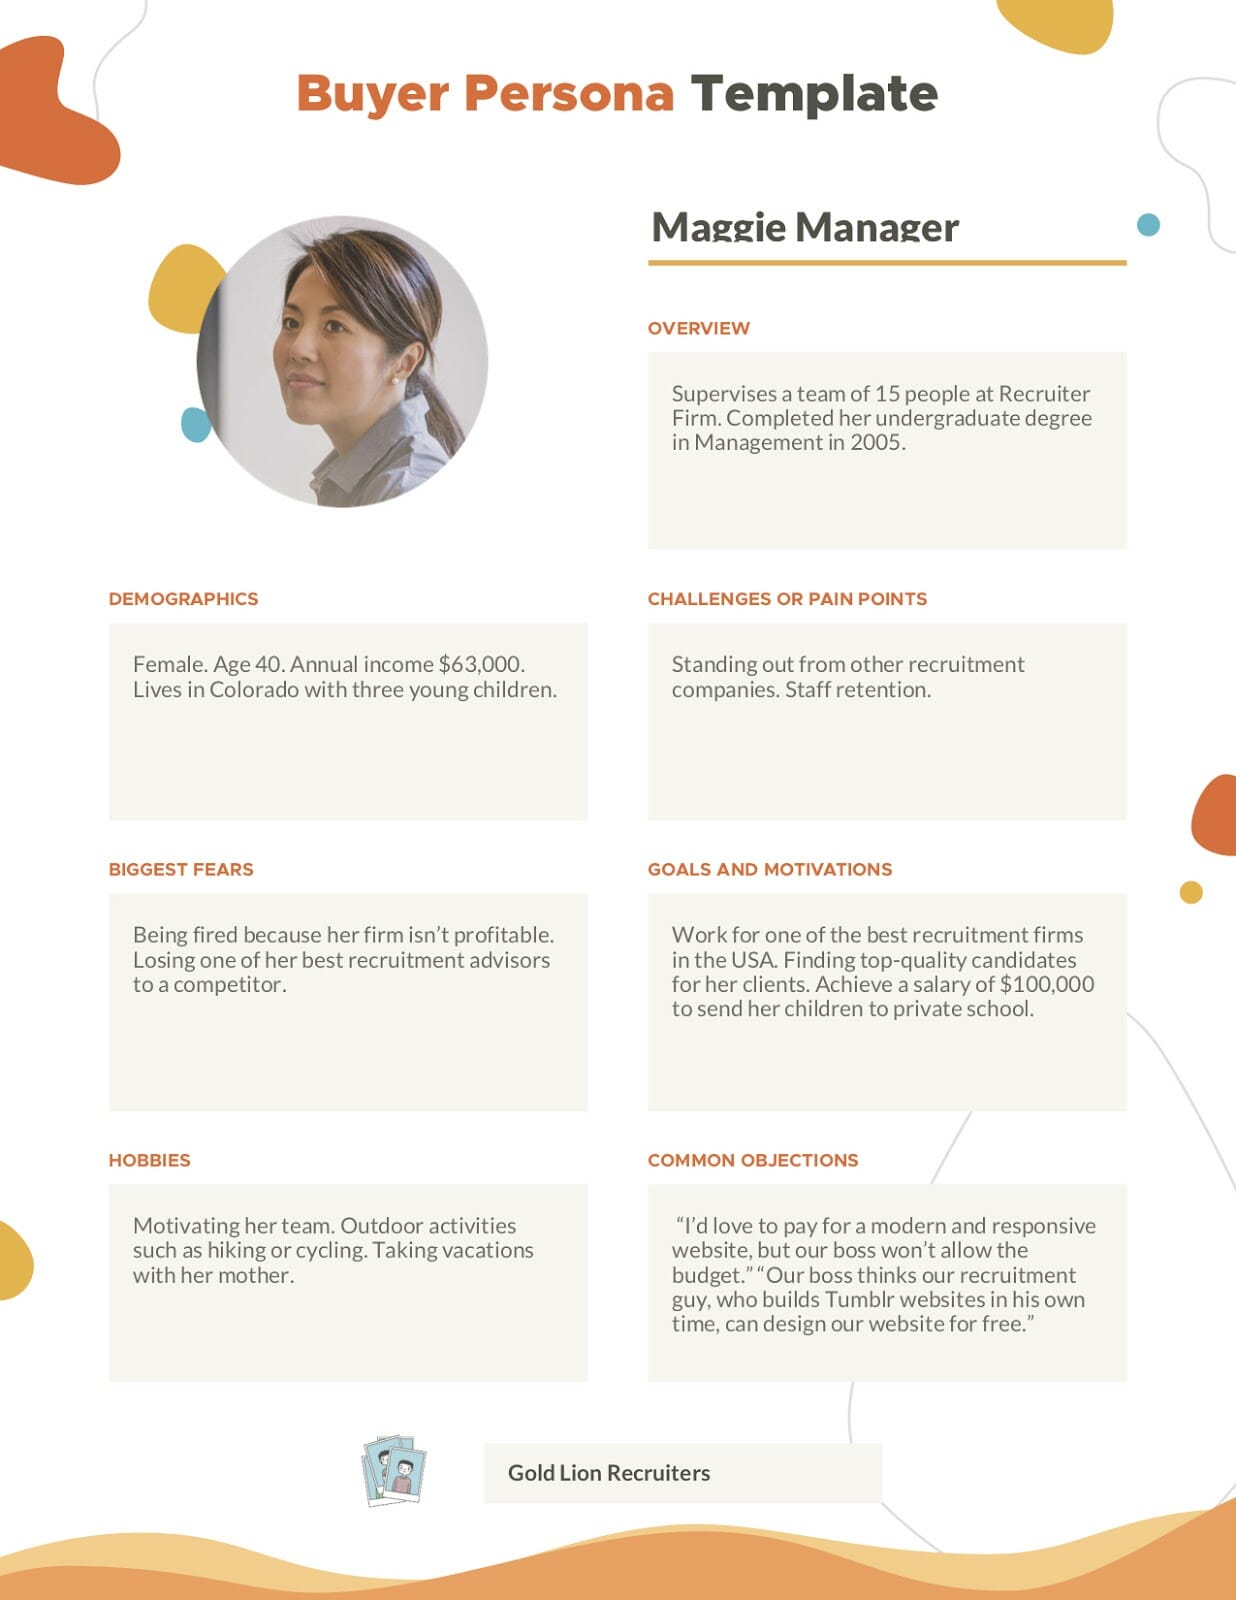 Buyer Persona - Maggie Manager